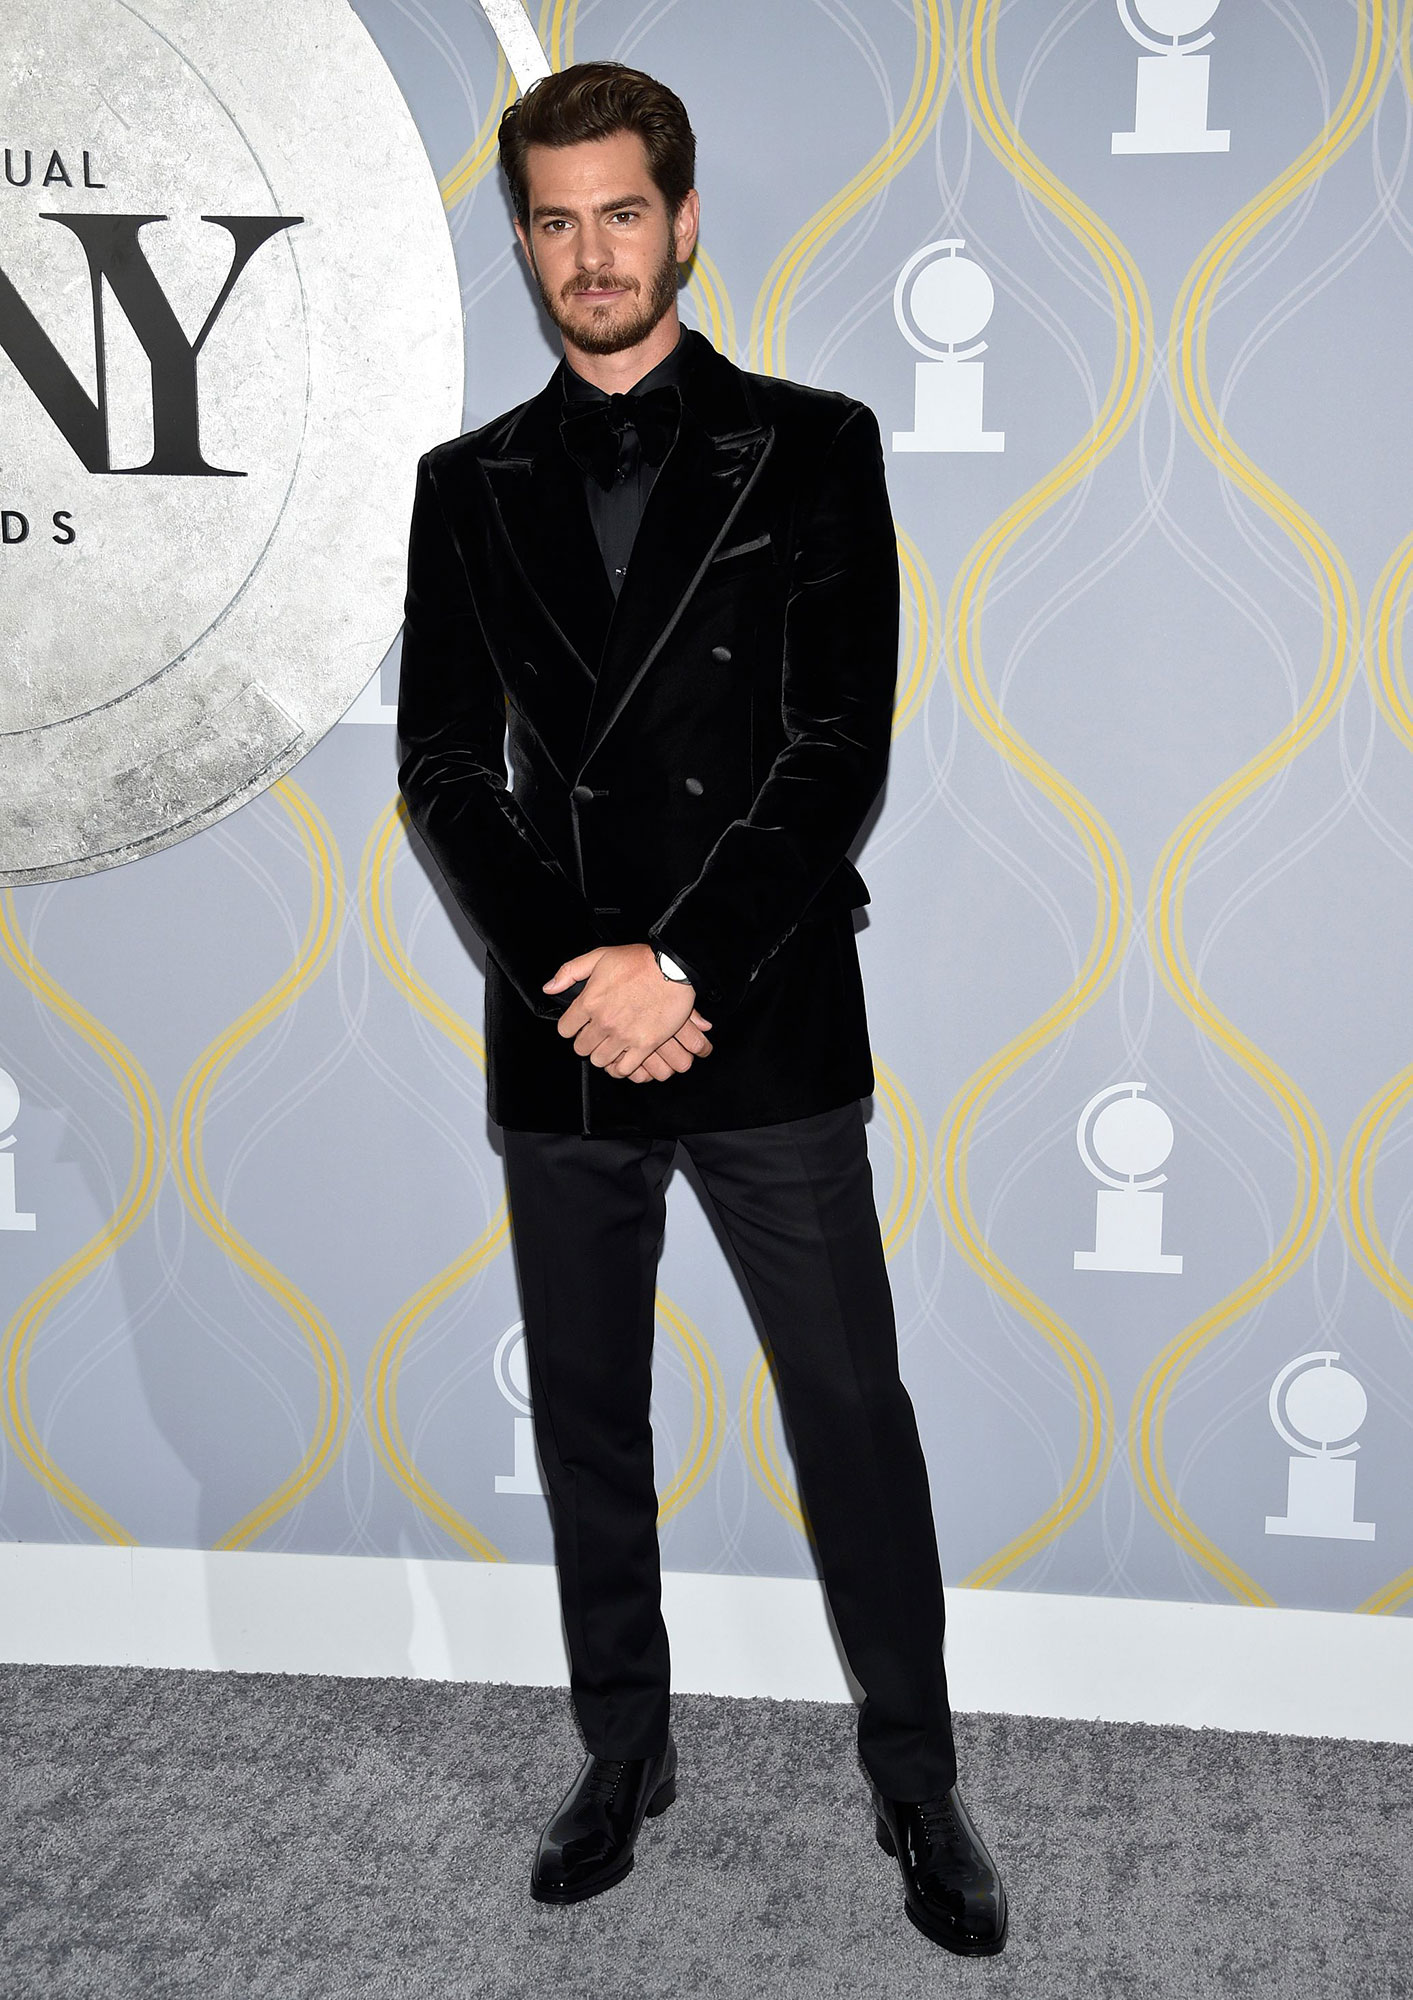 Andrew Garfield on the red carpet 